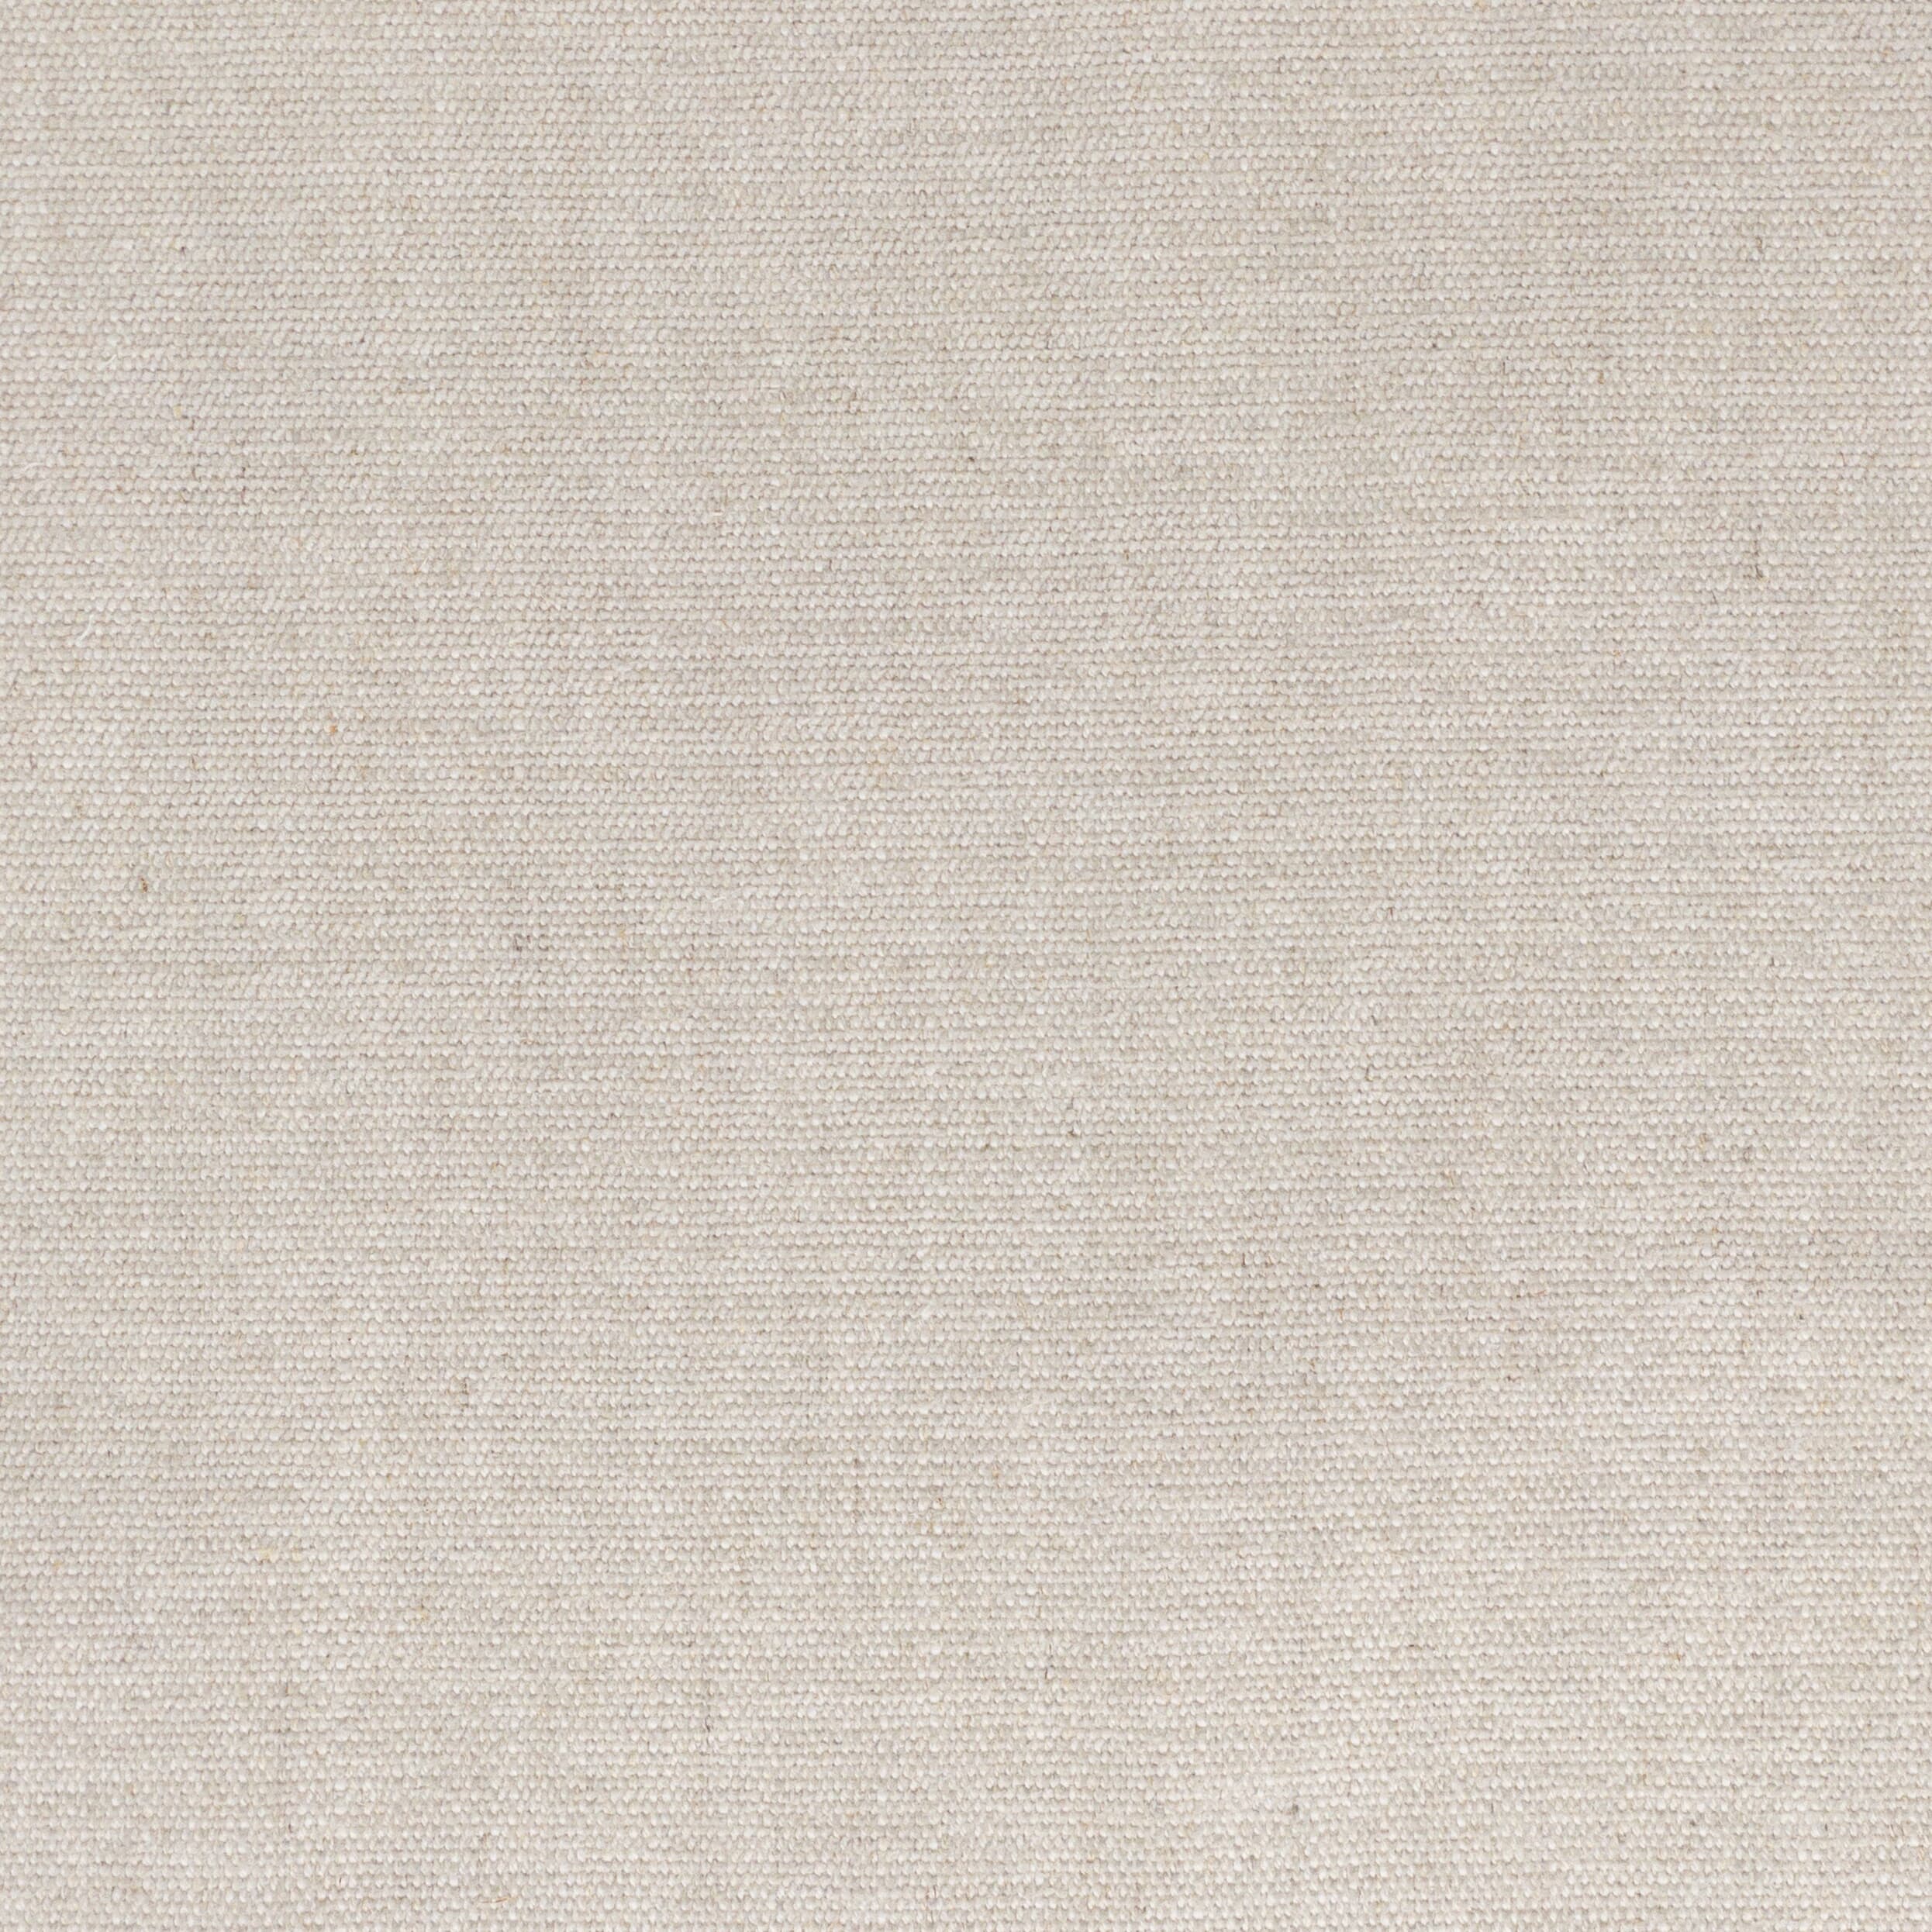 Judson 1 Taupe by Stout Fabric